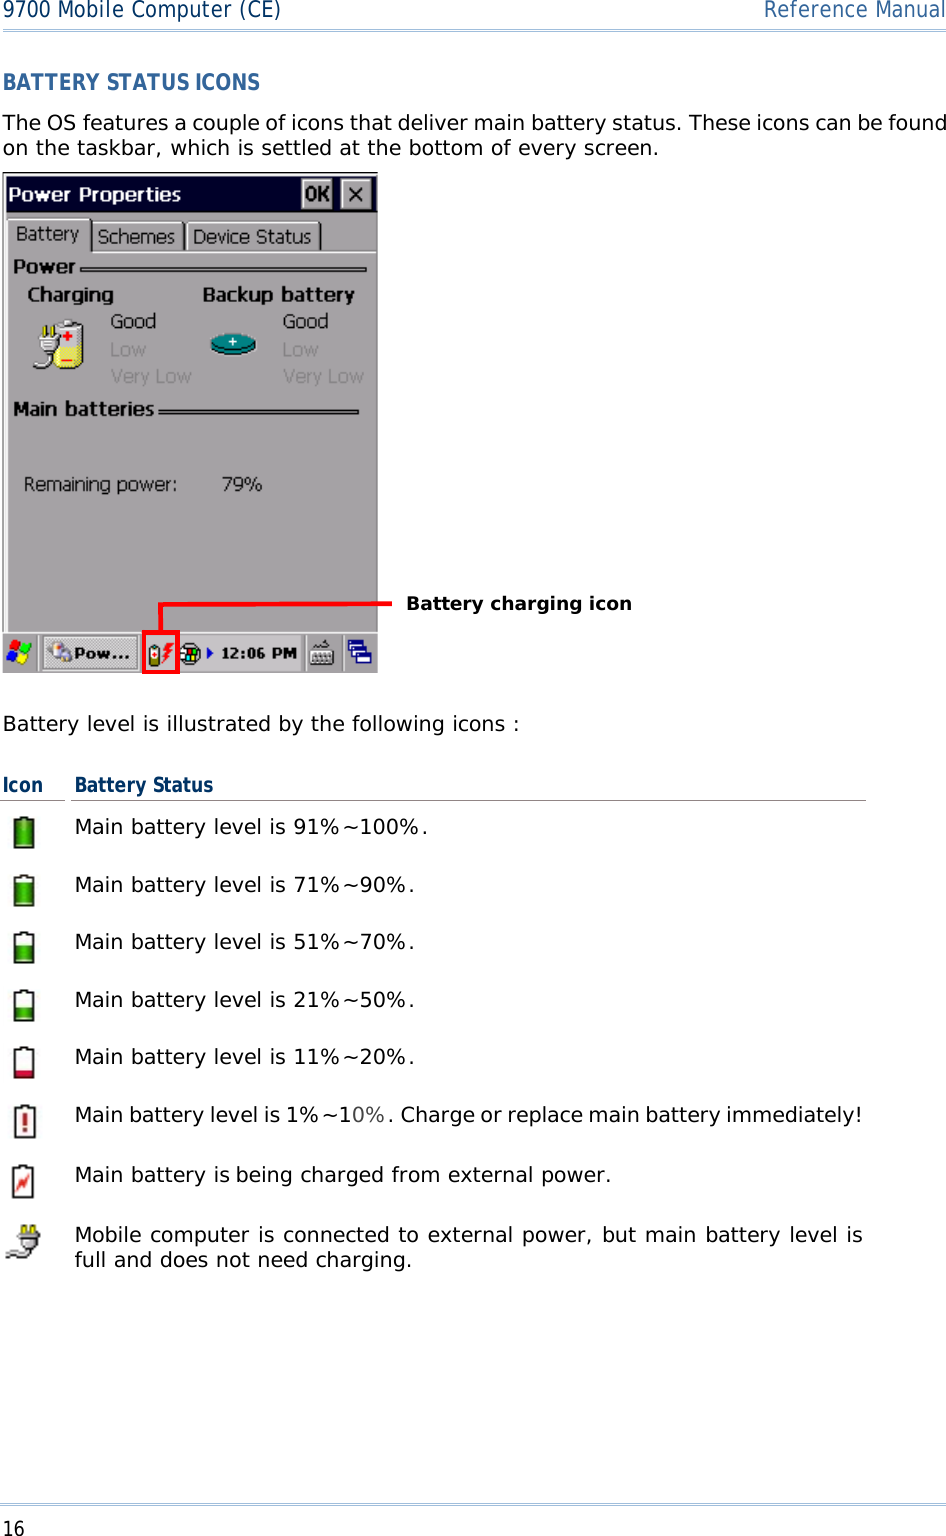 169700 Mobile Computer (CE)  Reference ManualBATTERY STATUS ICONS The OS features a couple of icons that deliver main battery status. These icons can be found on the taskbar, which is settled at the bottom of every screen. Battery level is illustrated by the following icons : Icon  Battery Status Main battery level is 91%~100%. Main battery level is 71%~90%. Main battery level is 51%~70%. Main battery level is 21%~50%. Main battery level is 11%~20%. Main battery level is 1%~10%. Charge or replace main battery immediately! Main battery isʳbeing charged from external power.  Mobile computer is connected to external power, but main battery level is full and does not need charging.  Battery charging icon